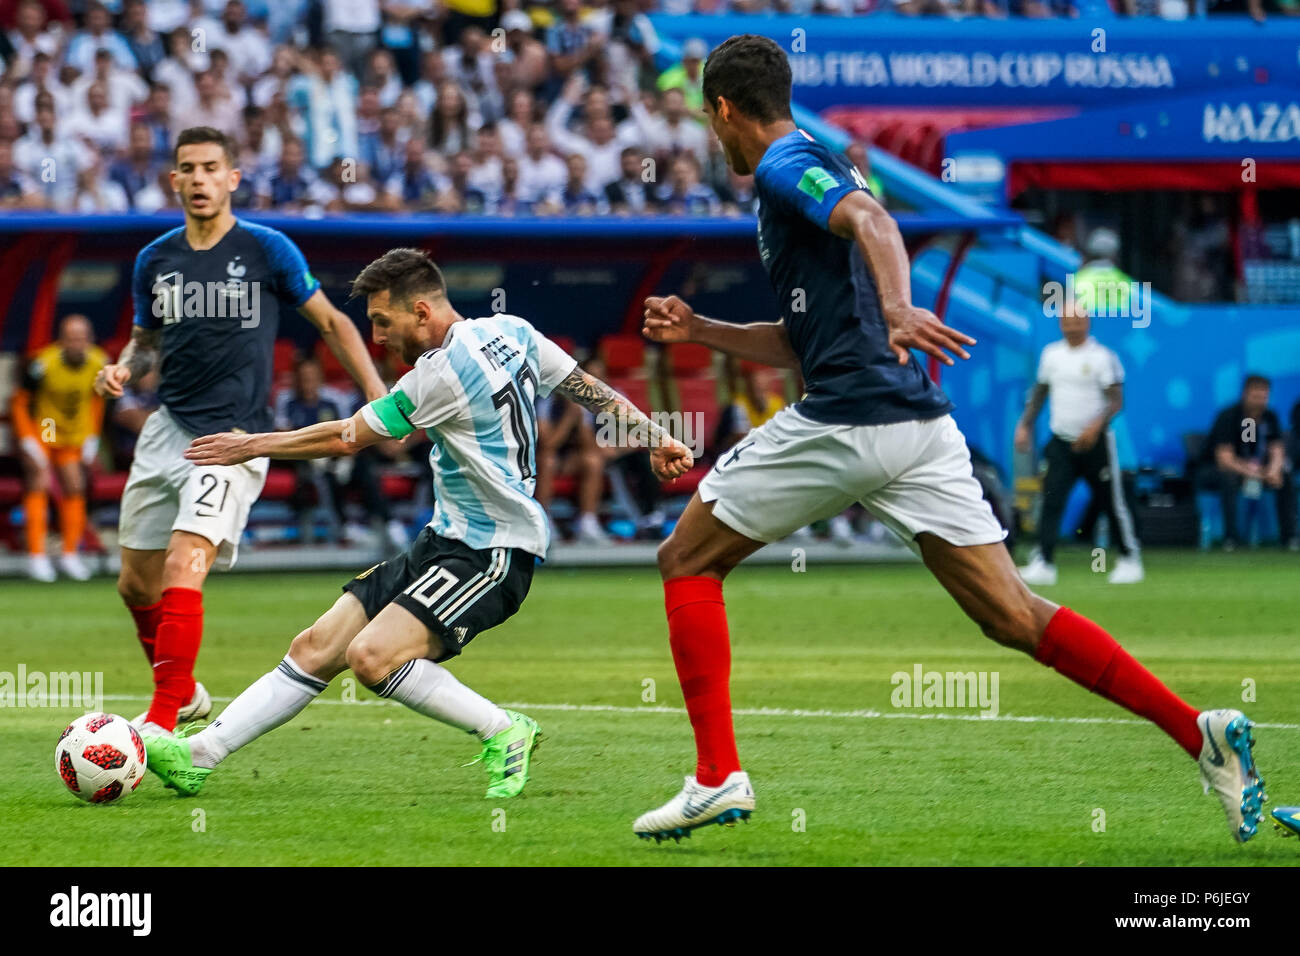 Kazan Arena, Kazan, Russia. 30th June, 2018. FIFA World Cup Football, Round of 16, France versus Argentina; Lionel Messi of Argentina shooting on goal Credit: Action Plus Sports/Alamy Live News Stock Photo